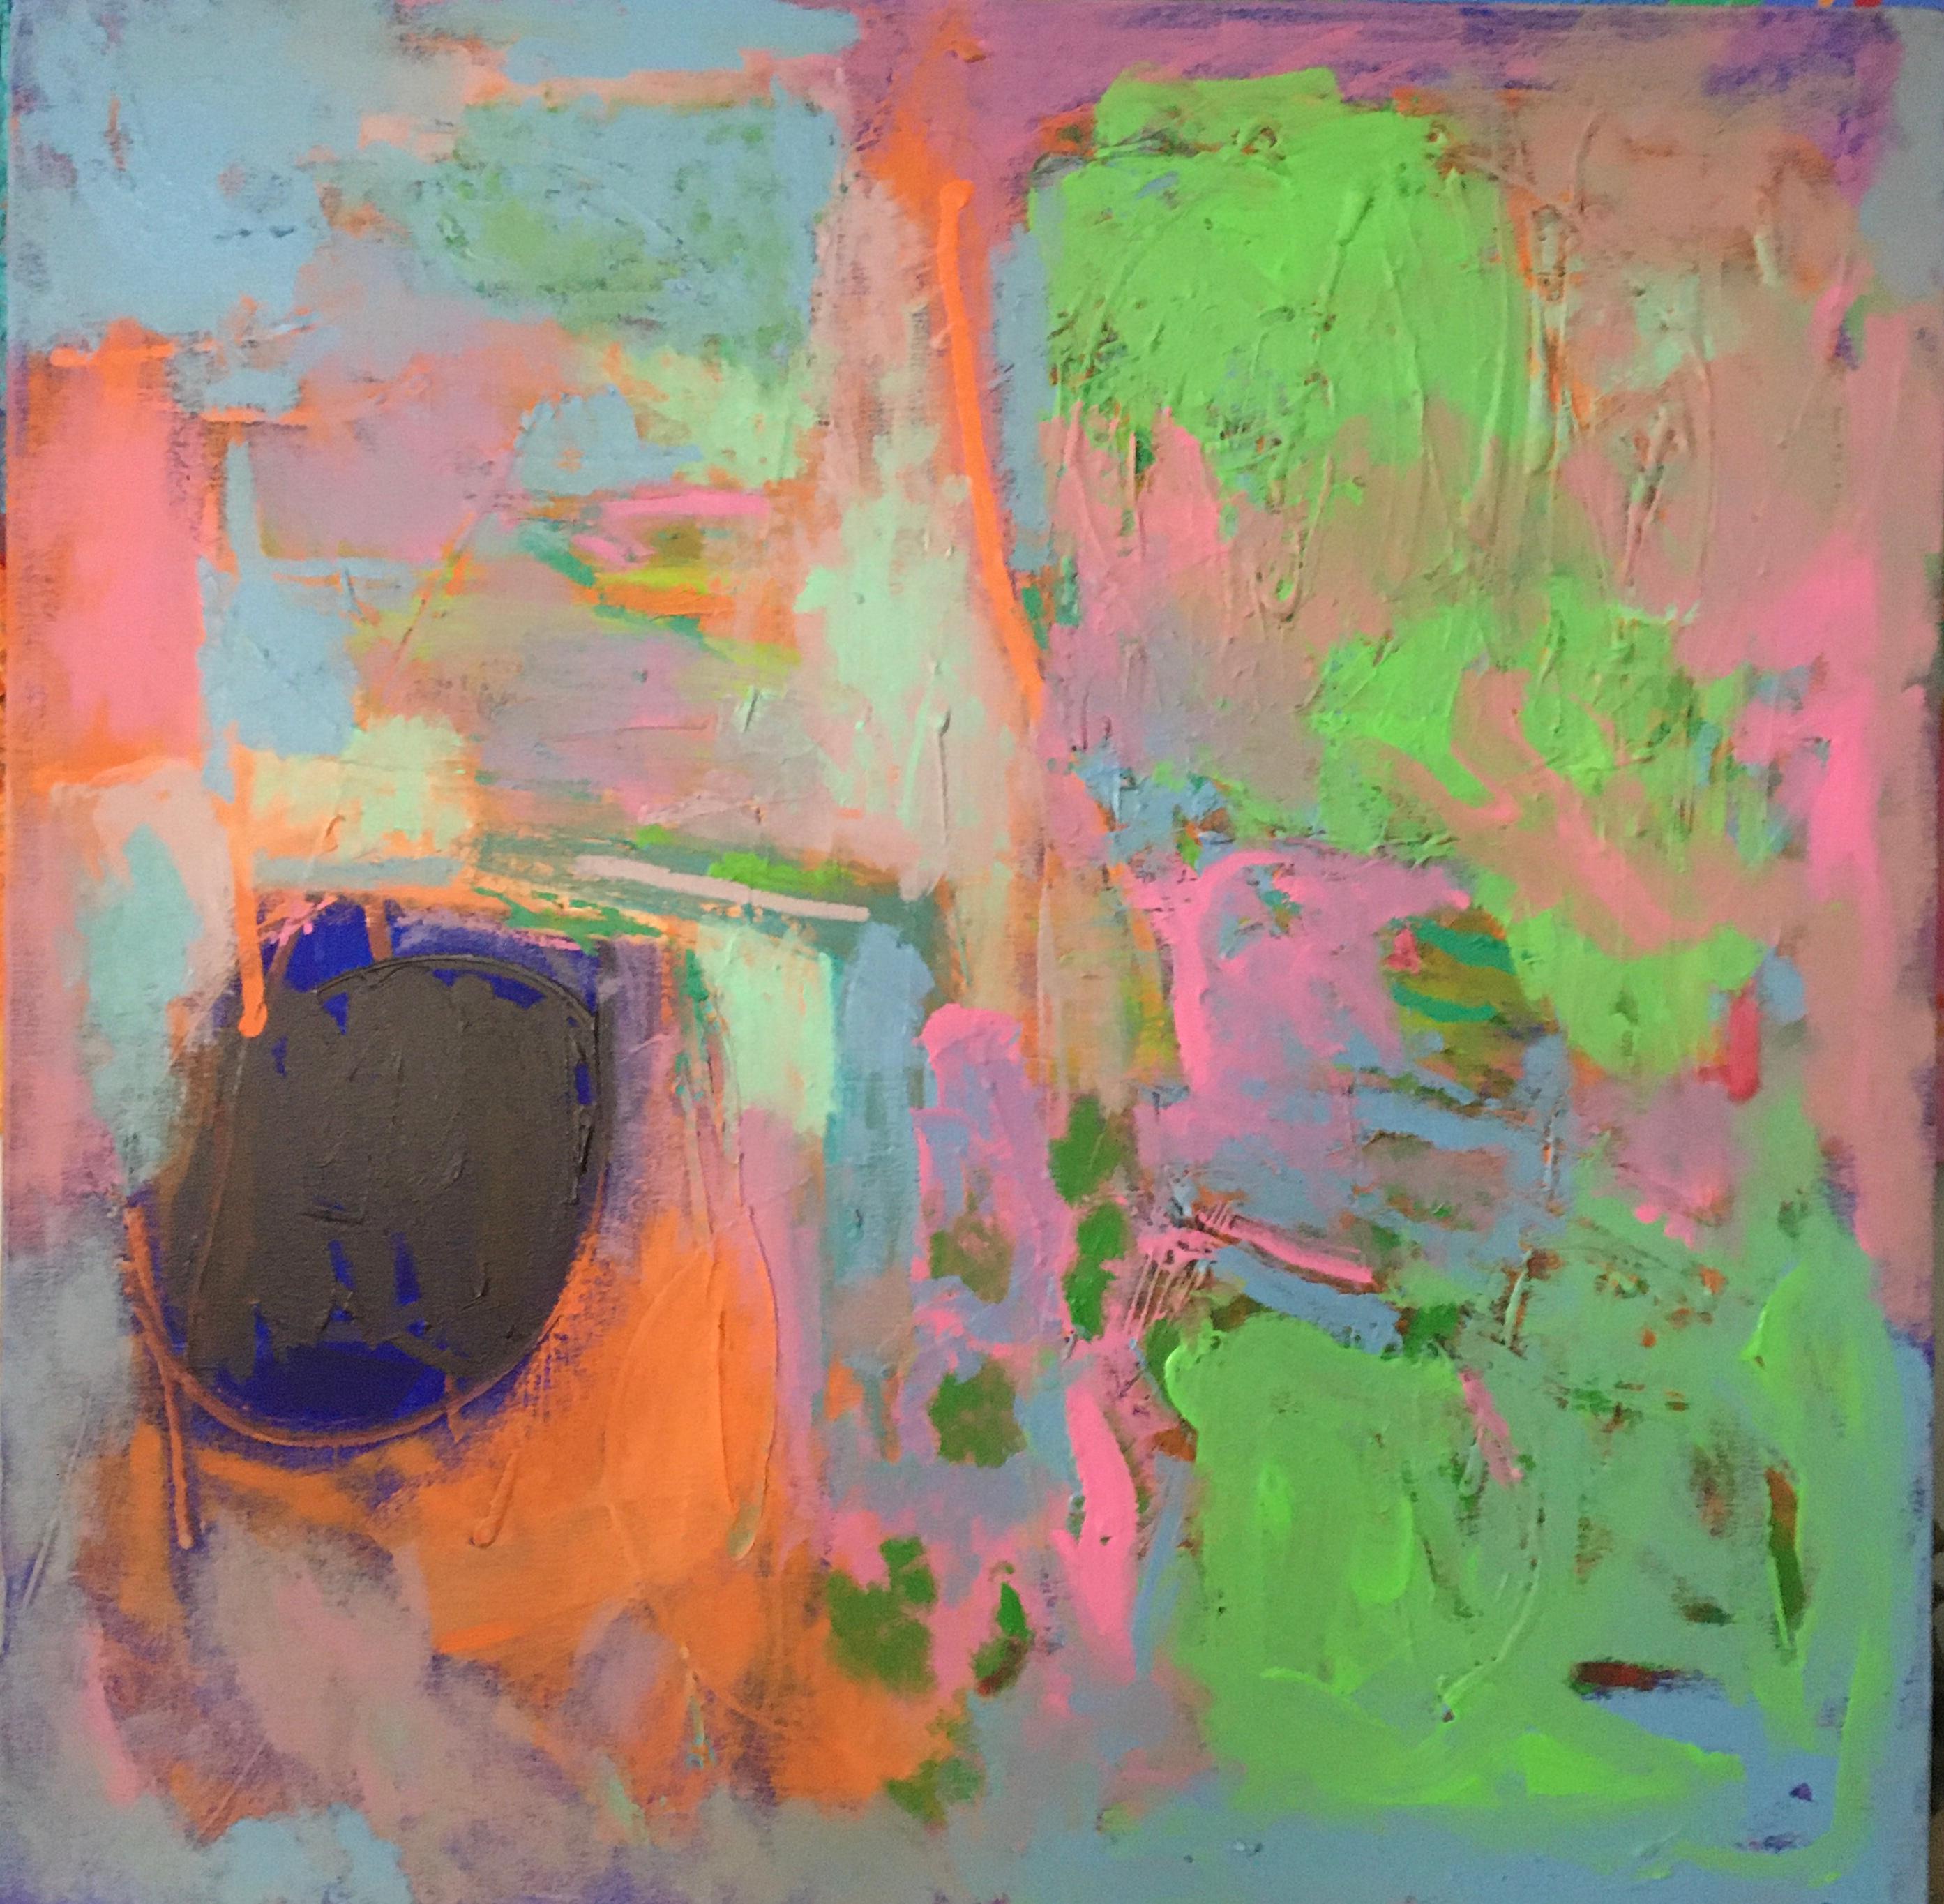 John Blee Abstract Painting - "Charbagh/Darkmoon" Pinks and Lime greens of spring delight in abstract painting